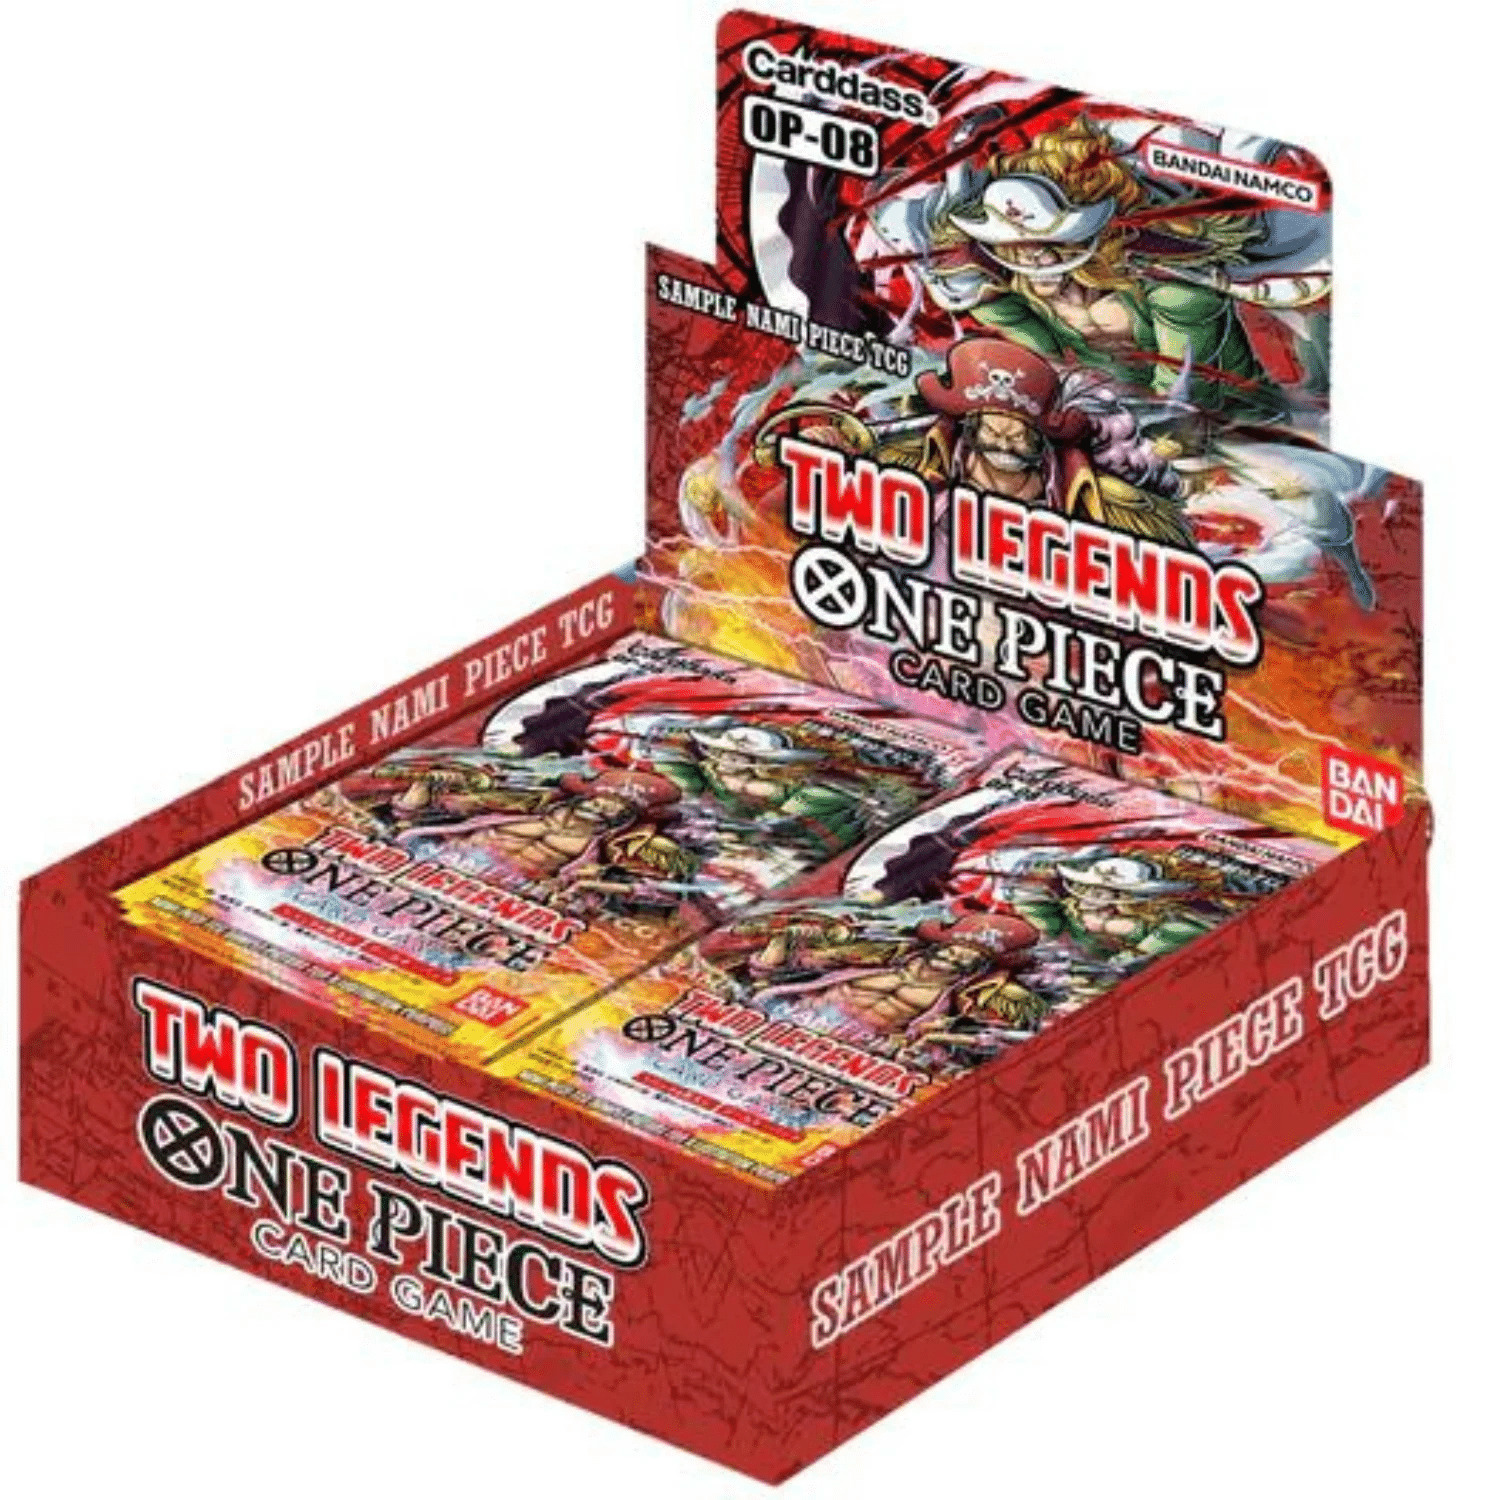 One Piece TCG OP08 TWO LEGENDS OP-08 Booster Box ENGLISH WAVE 2